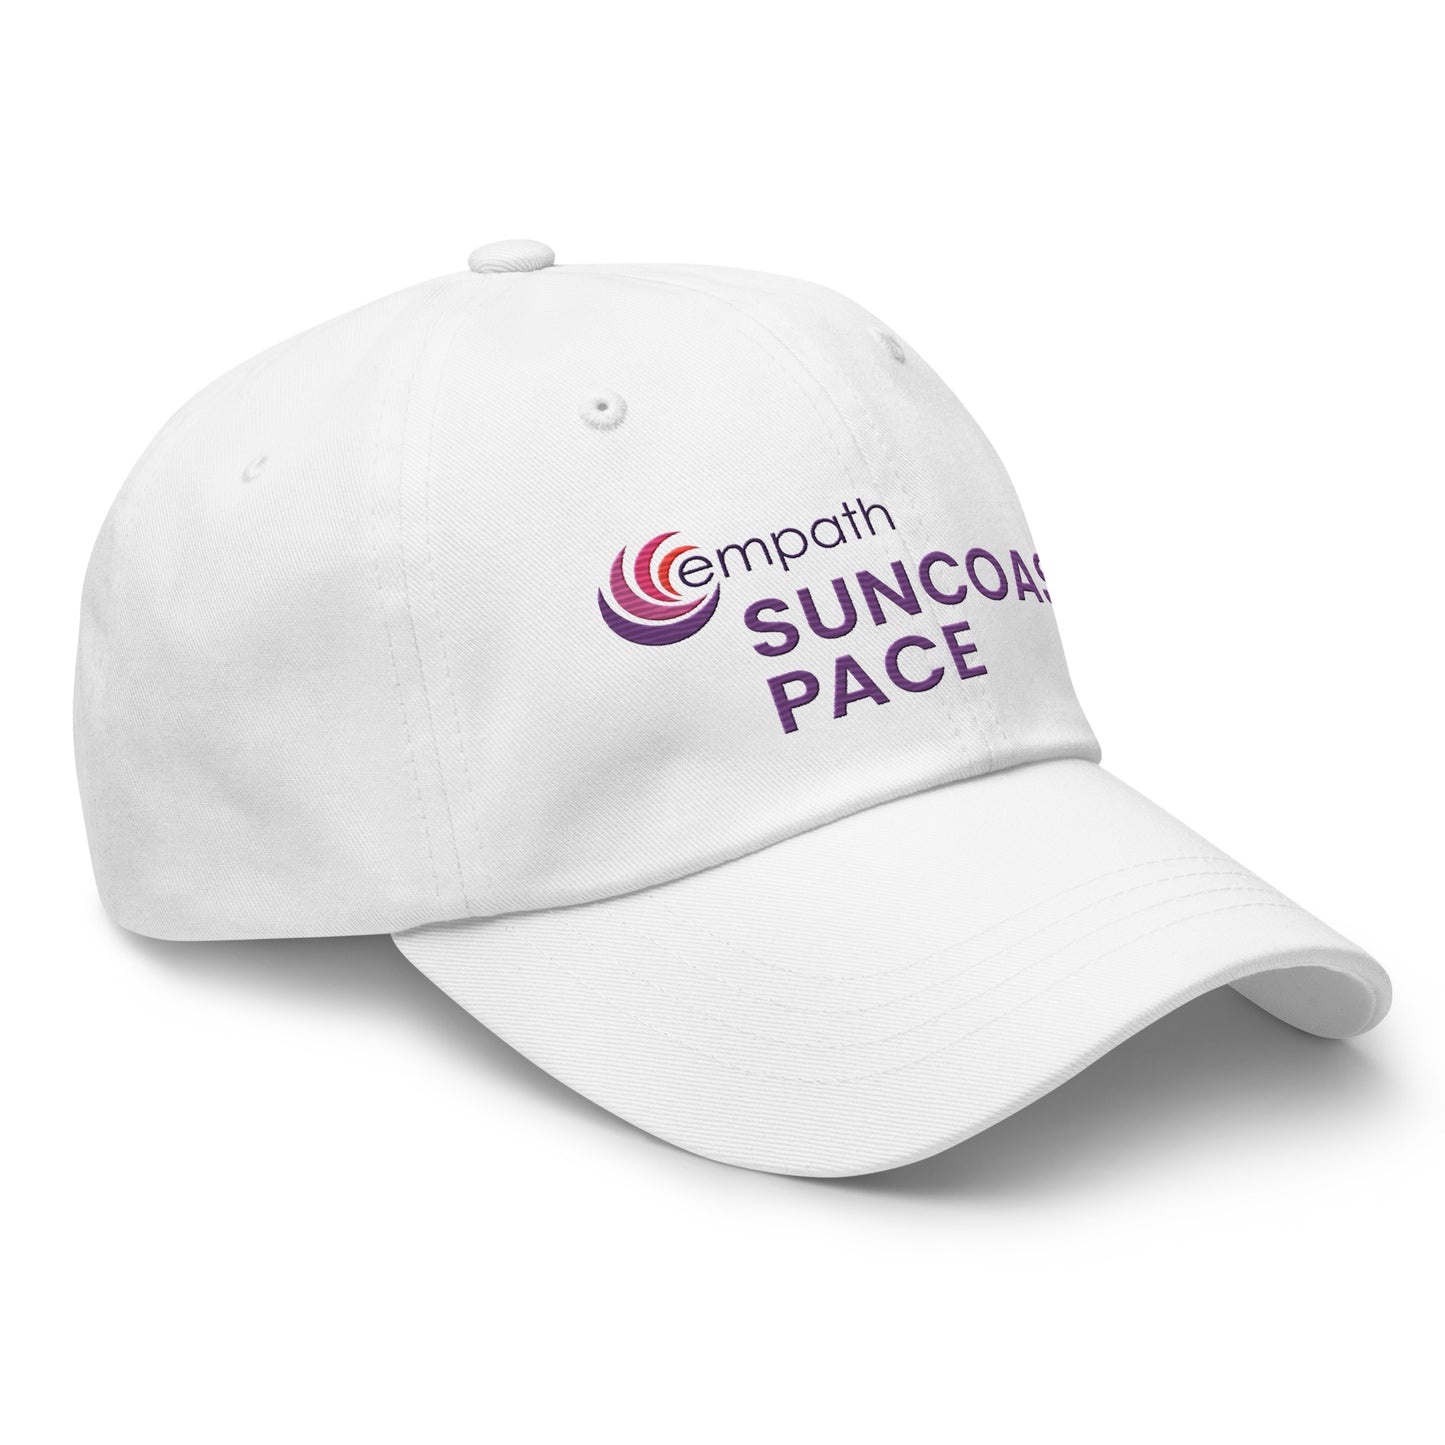 Classic Dad hat - Suncoast PACE